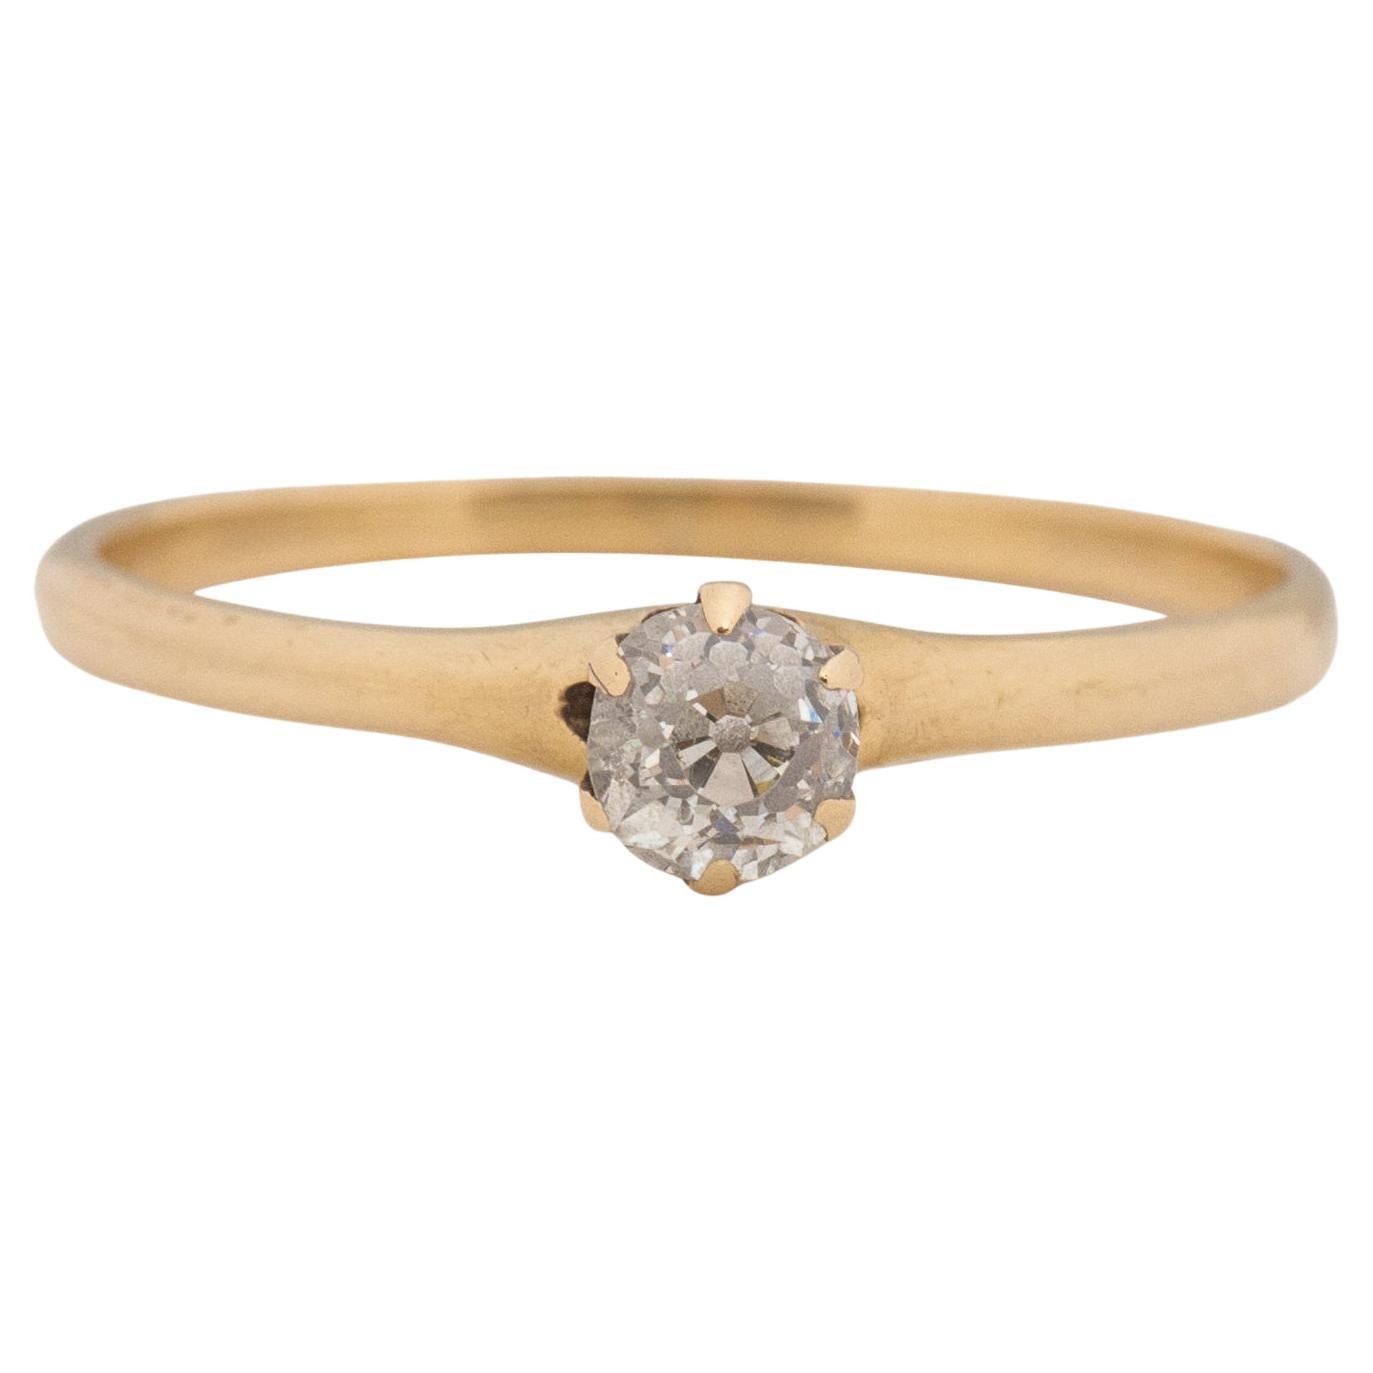 Victorian 14K Yellow Gold Old European Cut Diamond Solitaire Engagement Ring